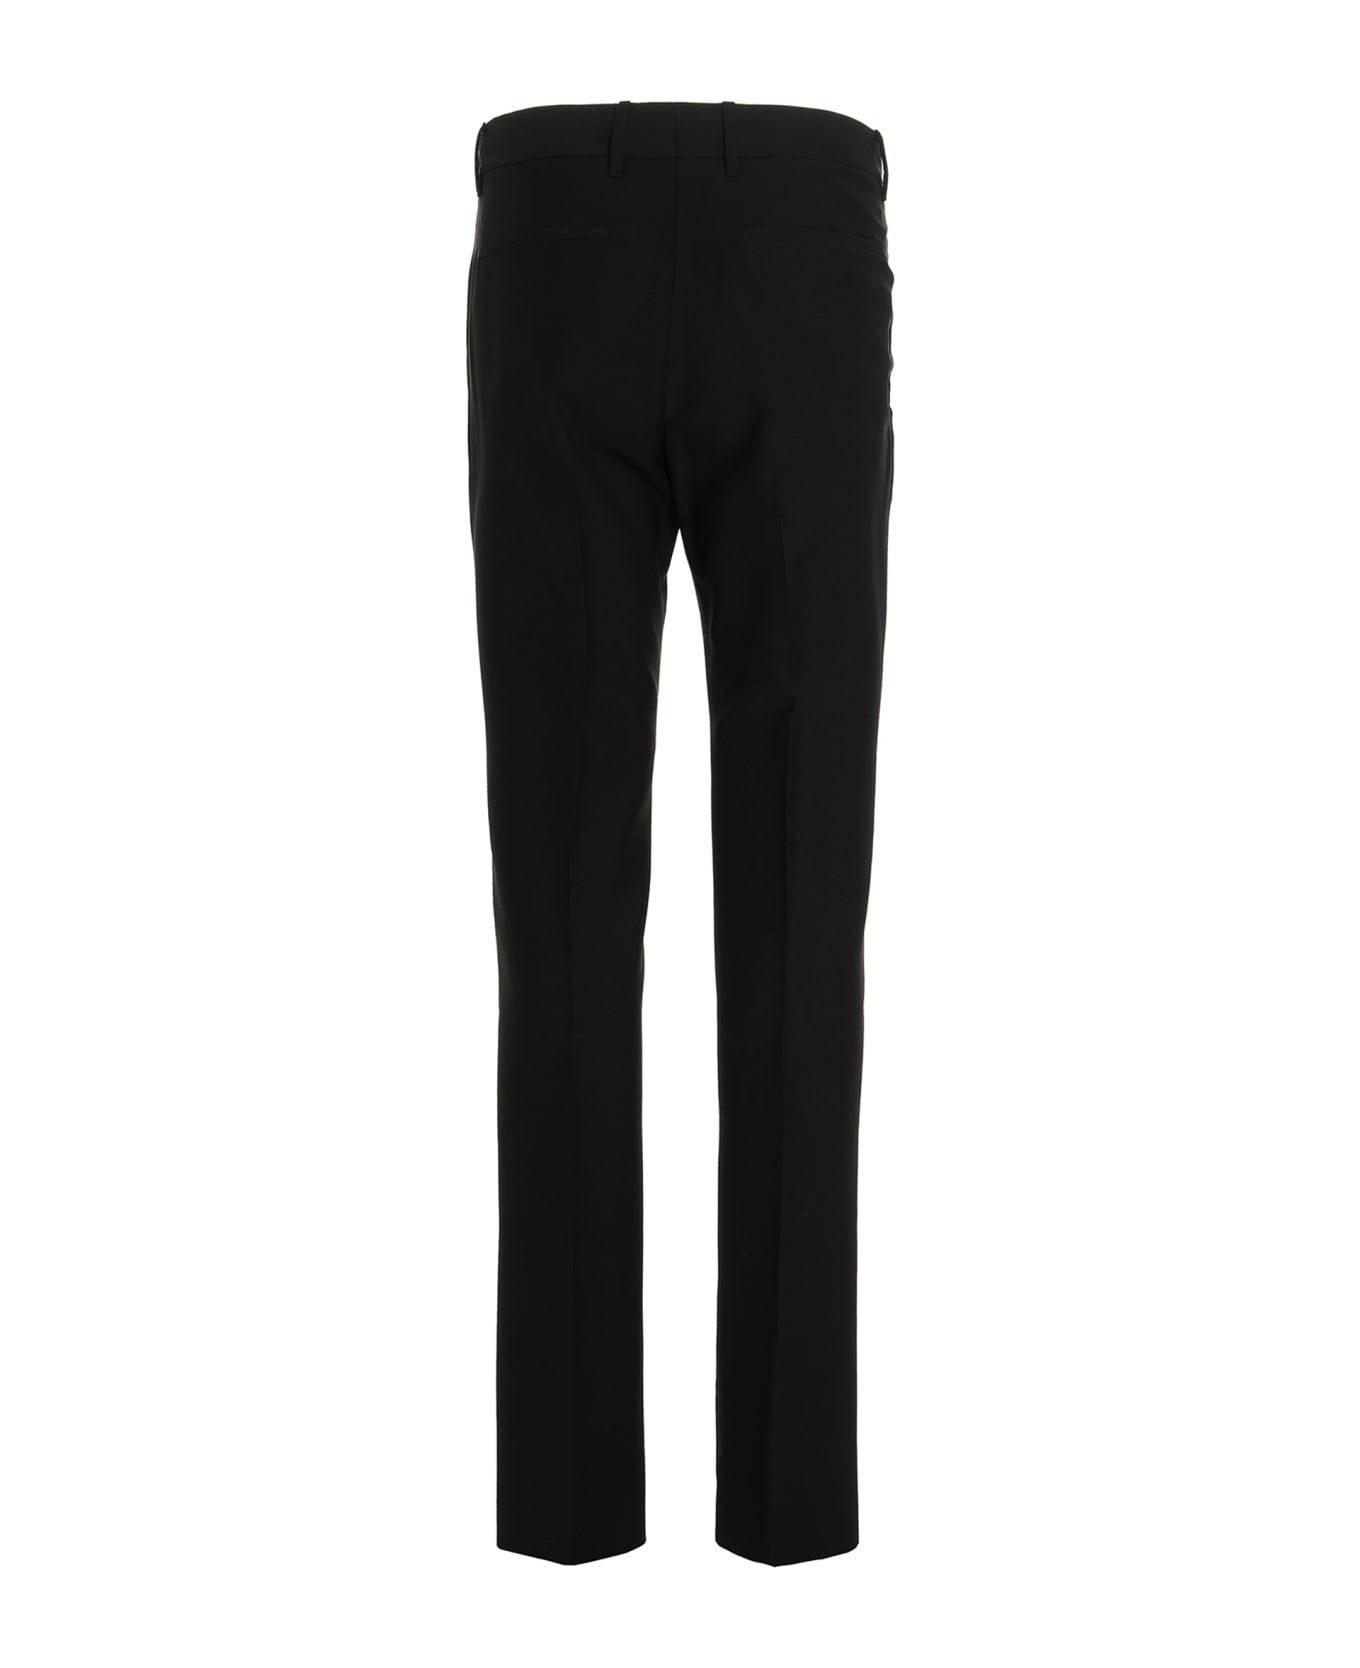 Givenchy Mohair Wool Pants - Nero ボトムス